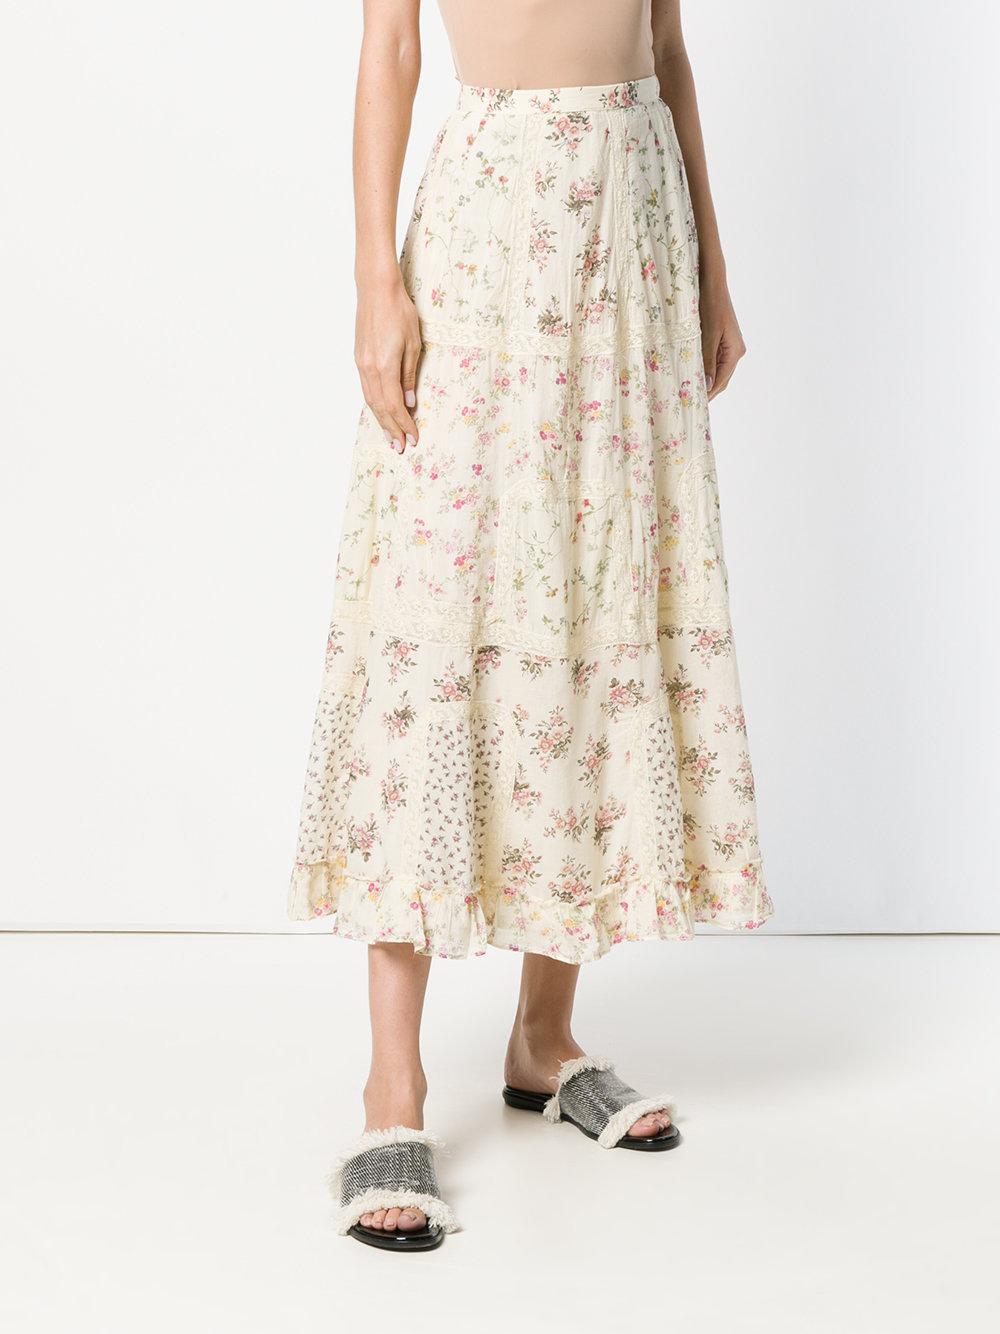 Polo Ralph Lauren Floral Flared Midi Skirt in Natural | Lyst